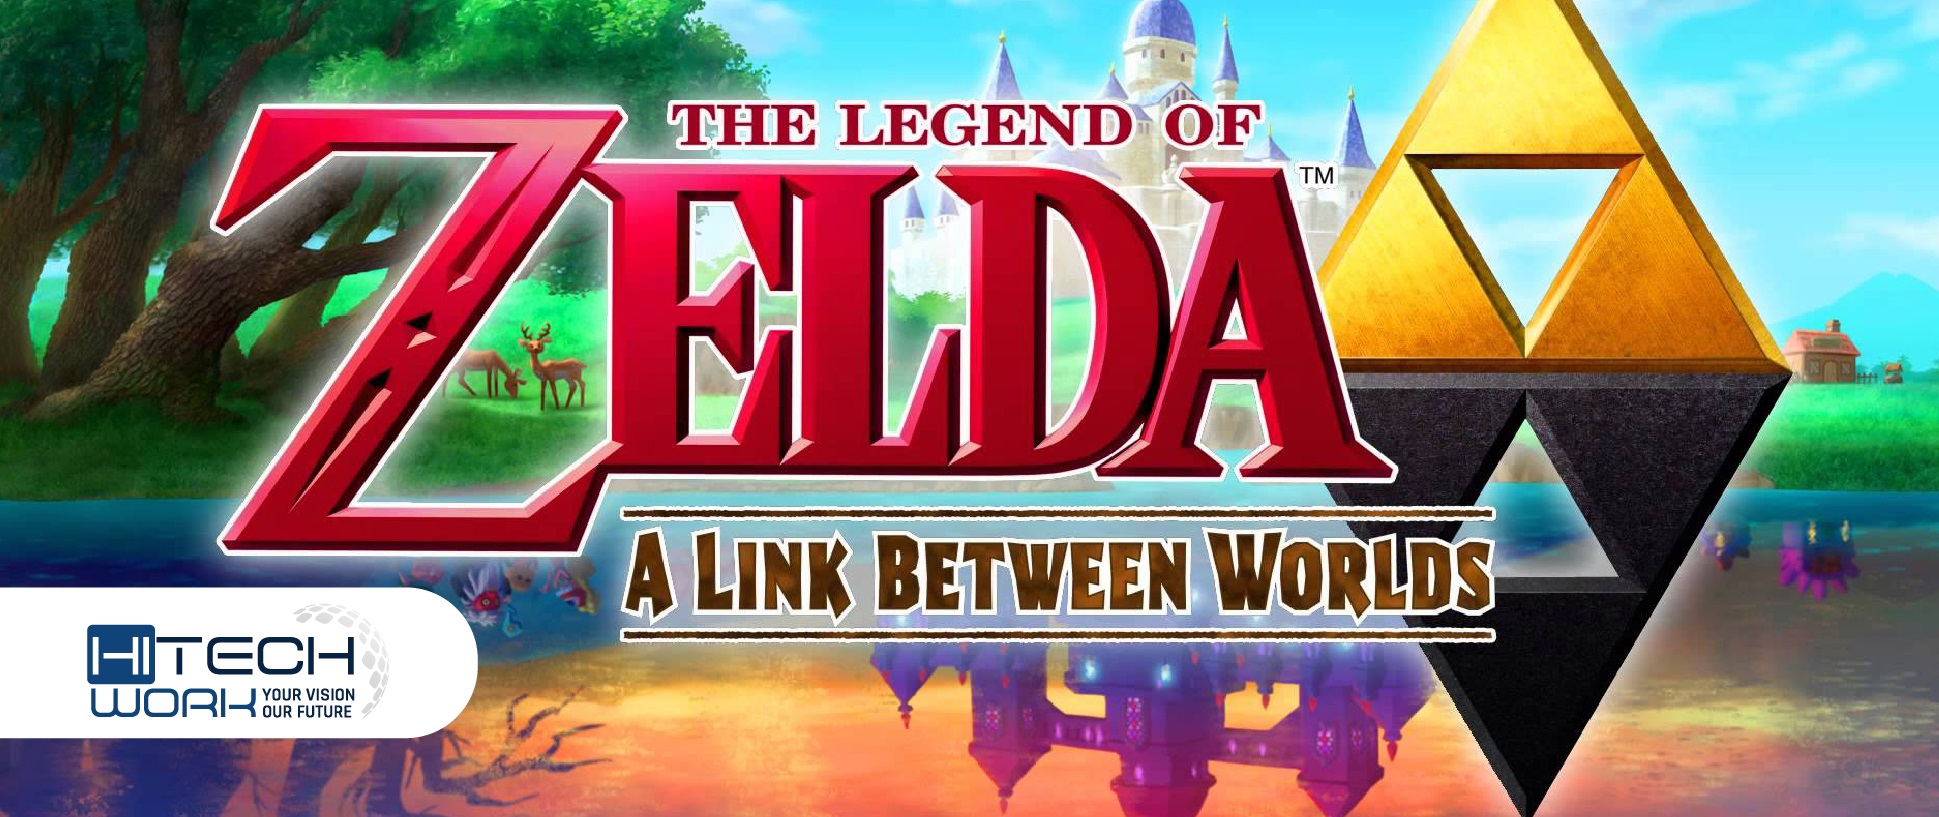 The Legend of Zelda: A Link Between Worlds (video game, action-adventure,  high fantasy) reviews & ratings - Glitchwave